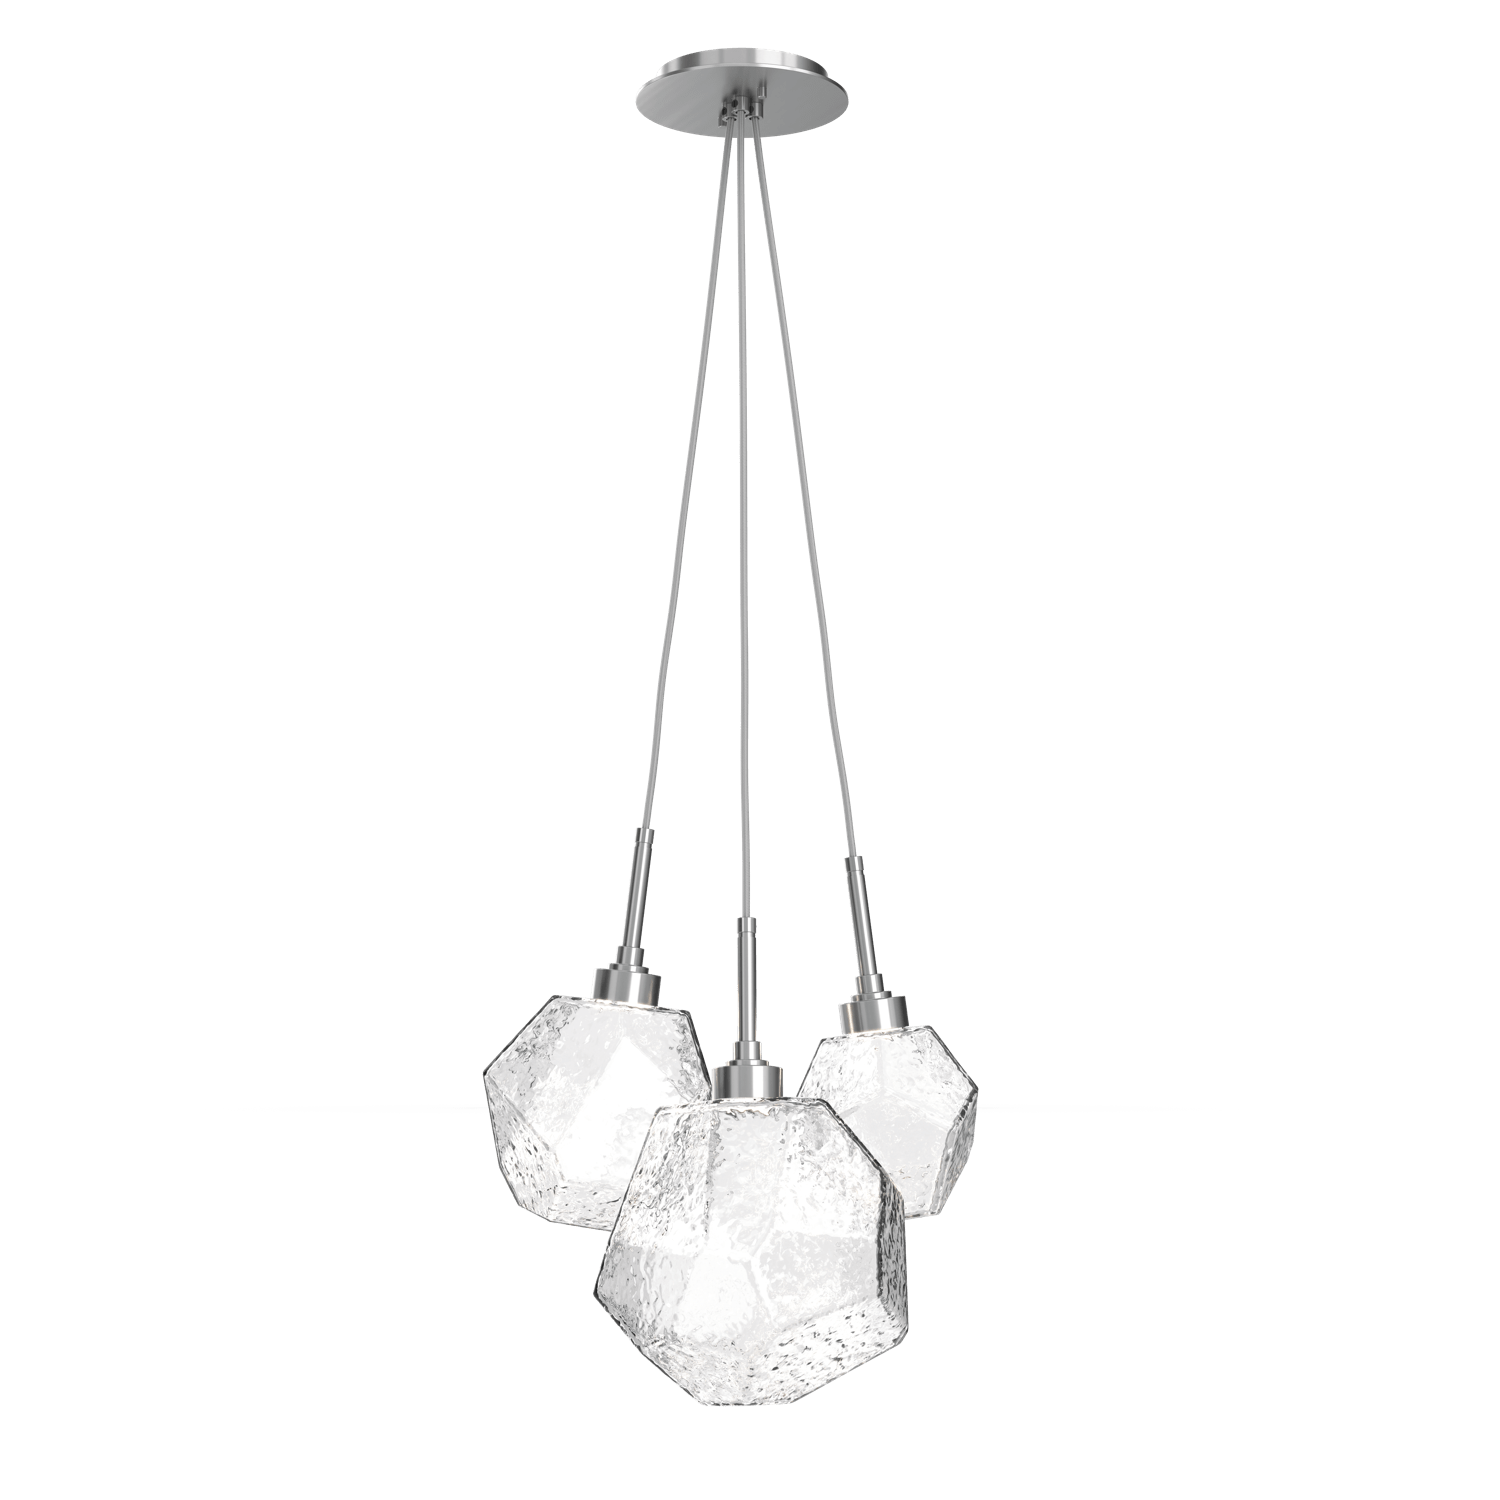 CHB0039-0E-SN-C-Hammerton-Studio-Gem-3-light-cluster-pendant-light-with-satin-nickel-finish-and-clear-blown-glass-shades-and-LED-lamping